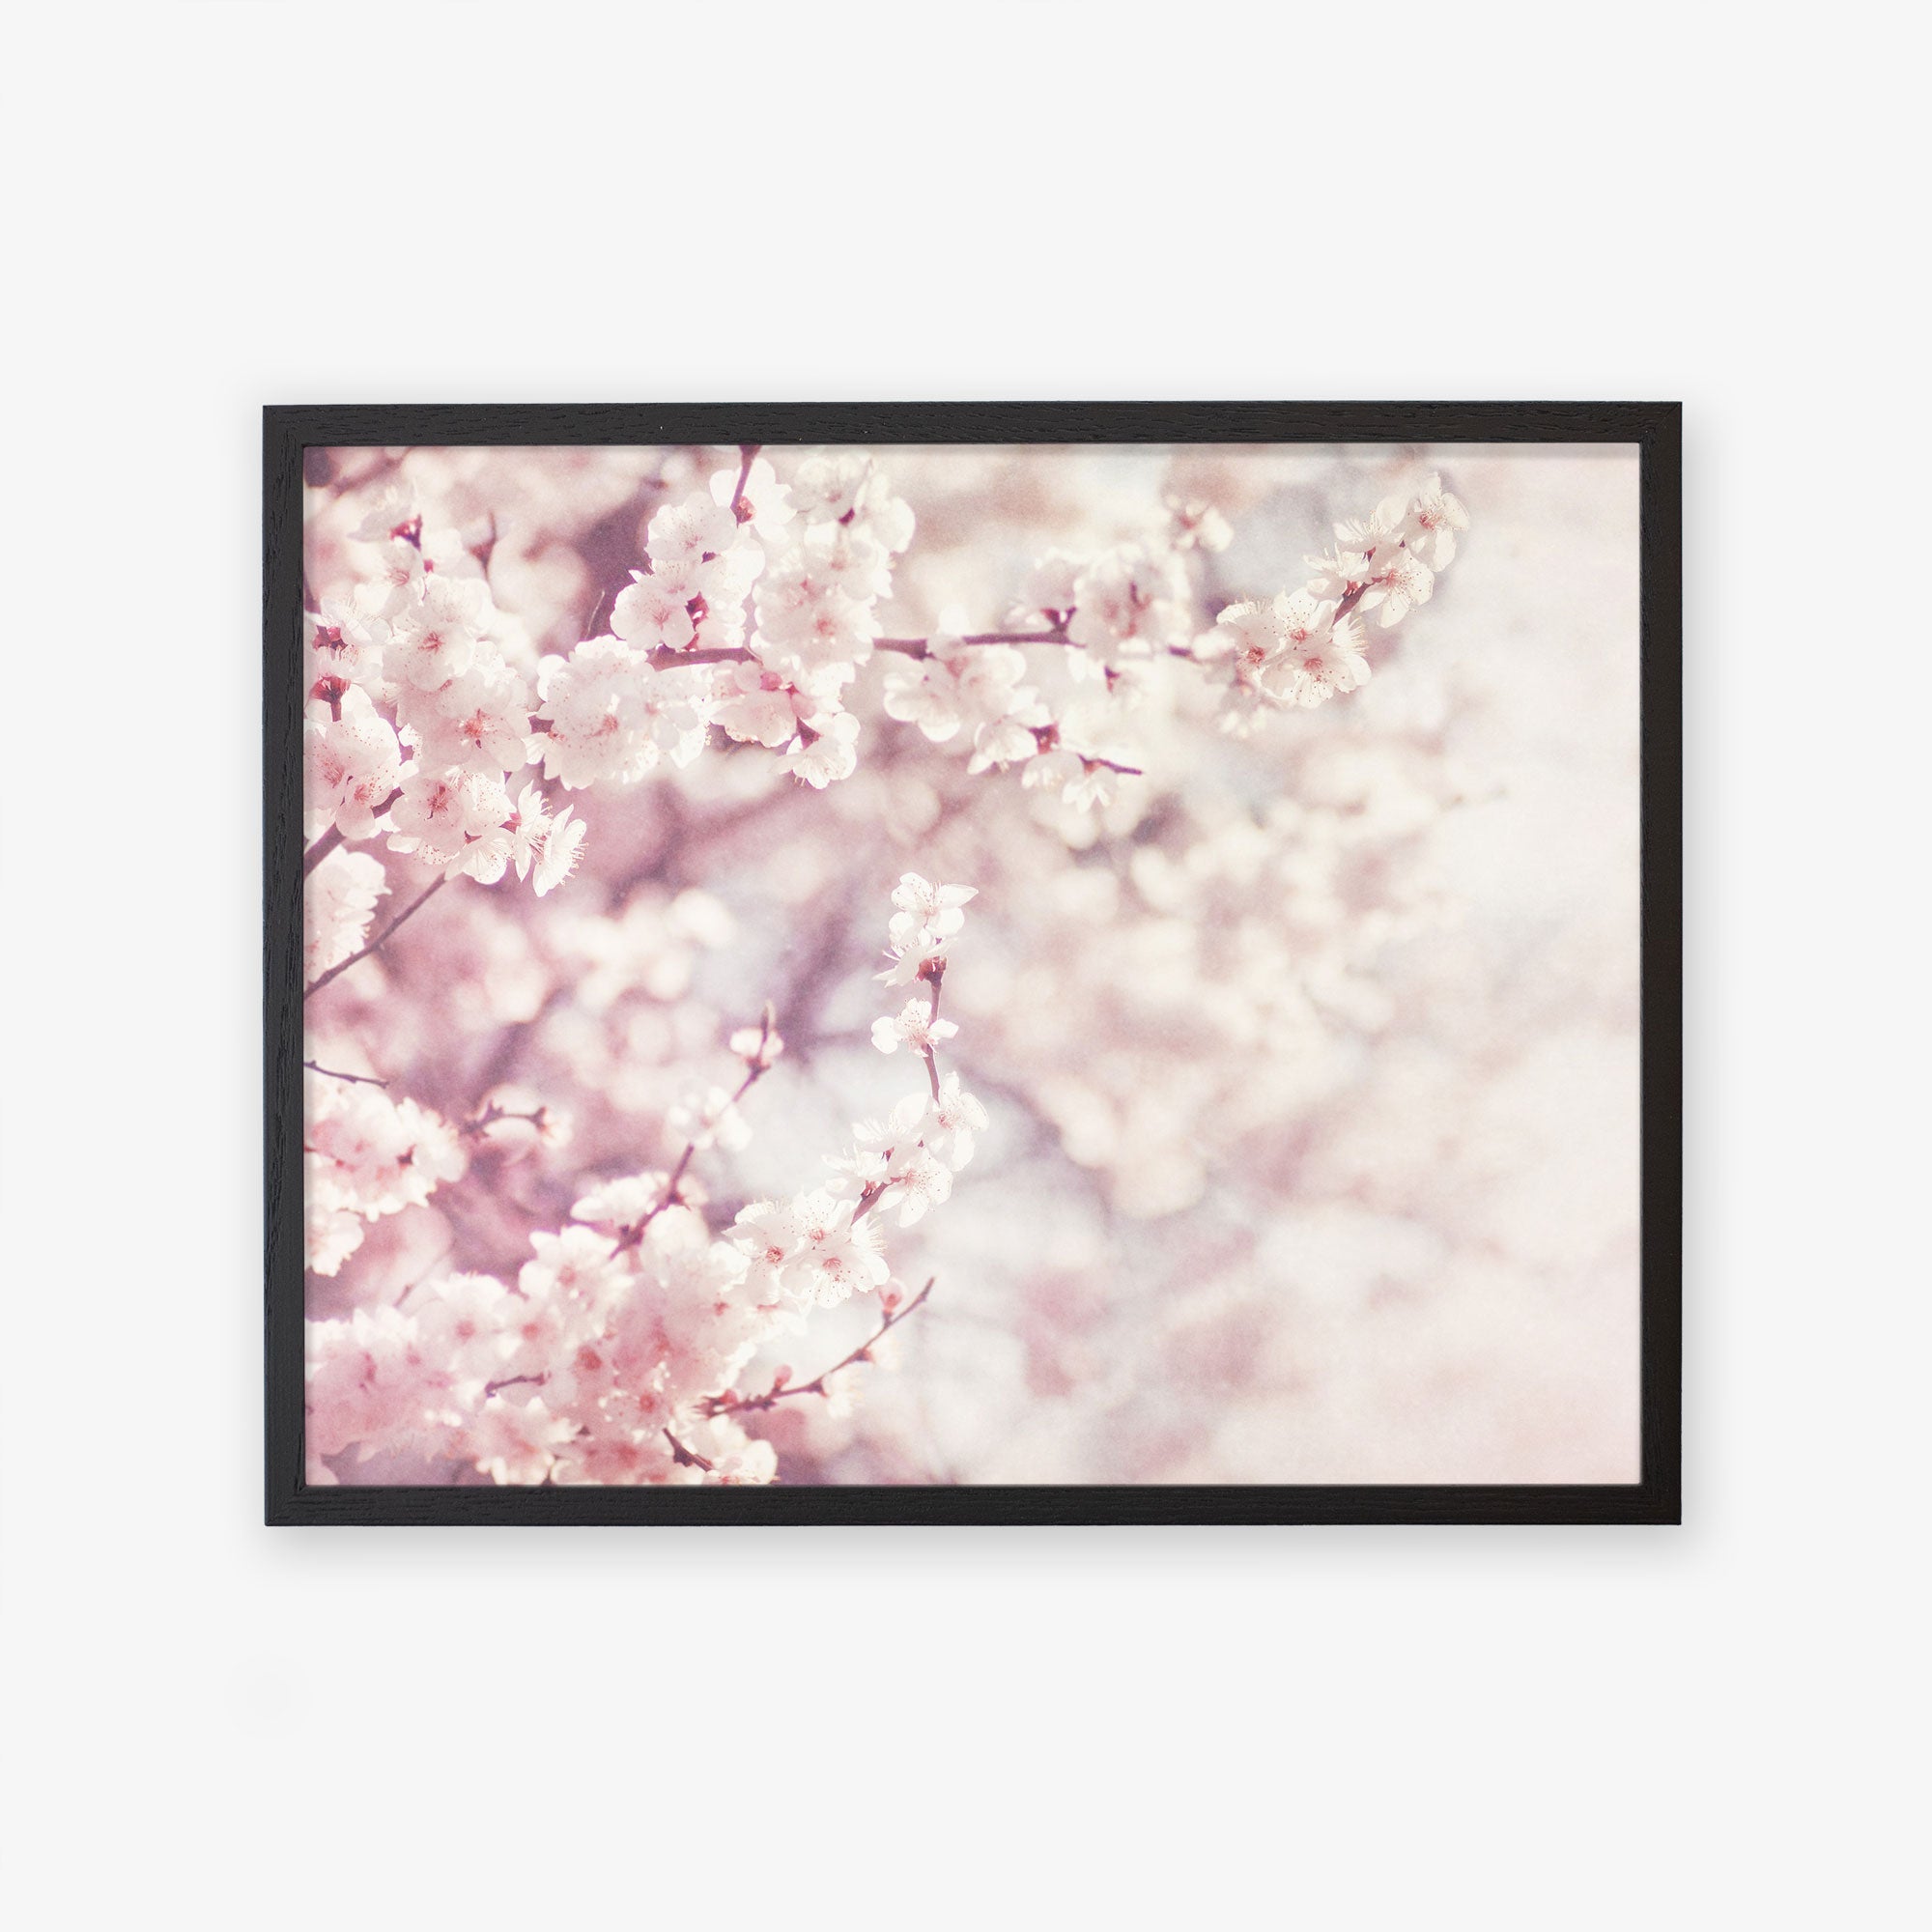 Framed artwork featuring the &#39;Dreamy Blossom&#39; Pink Floral Print by Offley Green, a close-up photograph of pink cherry blossoms against a soft, blurred background, printed on archival photographic paper. The image conveys a serene and delicate spring scene.